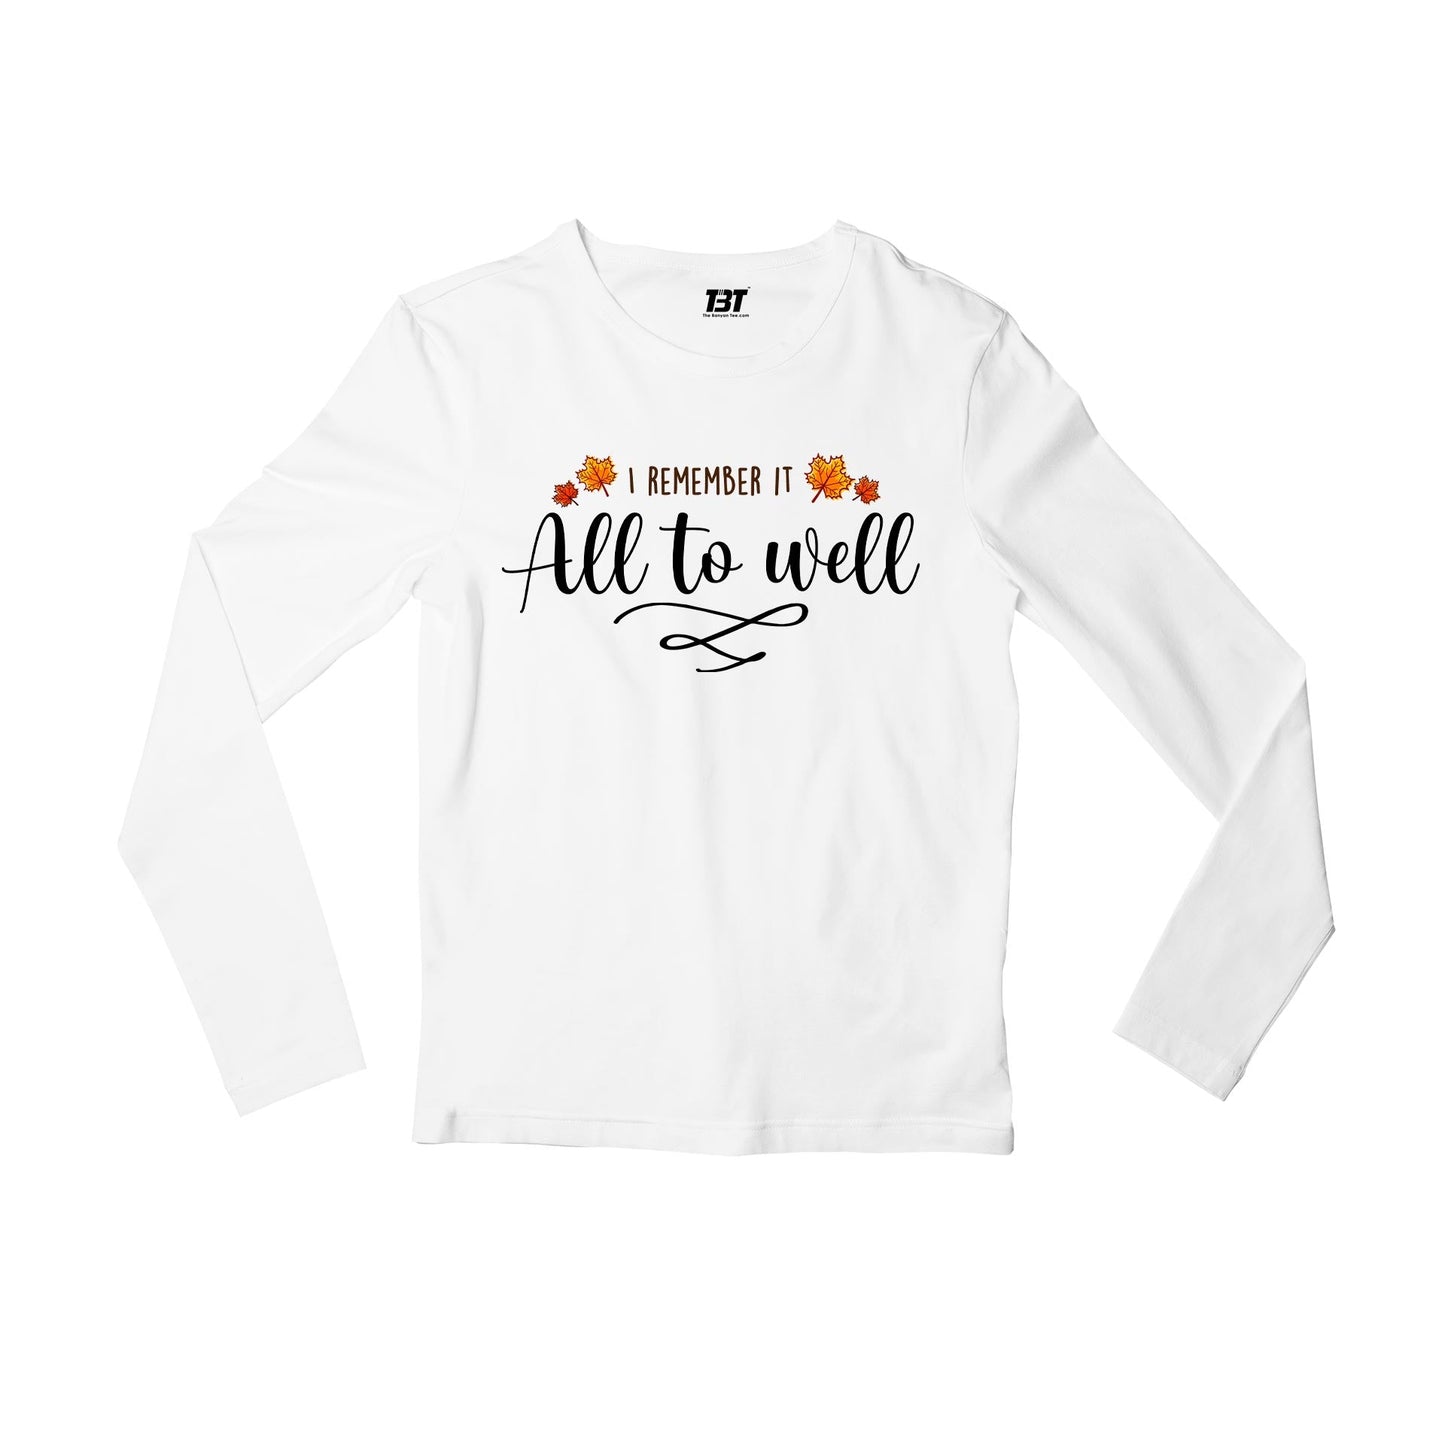 taylor swift all too well full sleeves long sleeves music band buy online india the banyan tee tbt men women girls boys unisex white